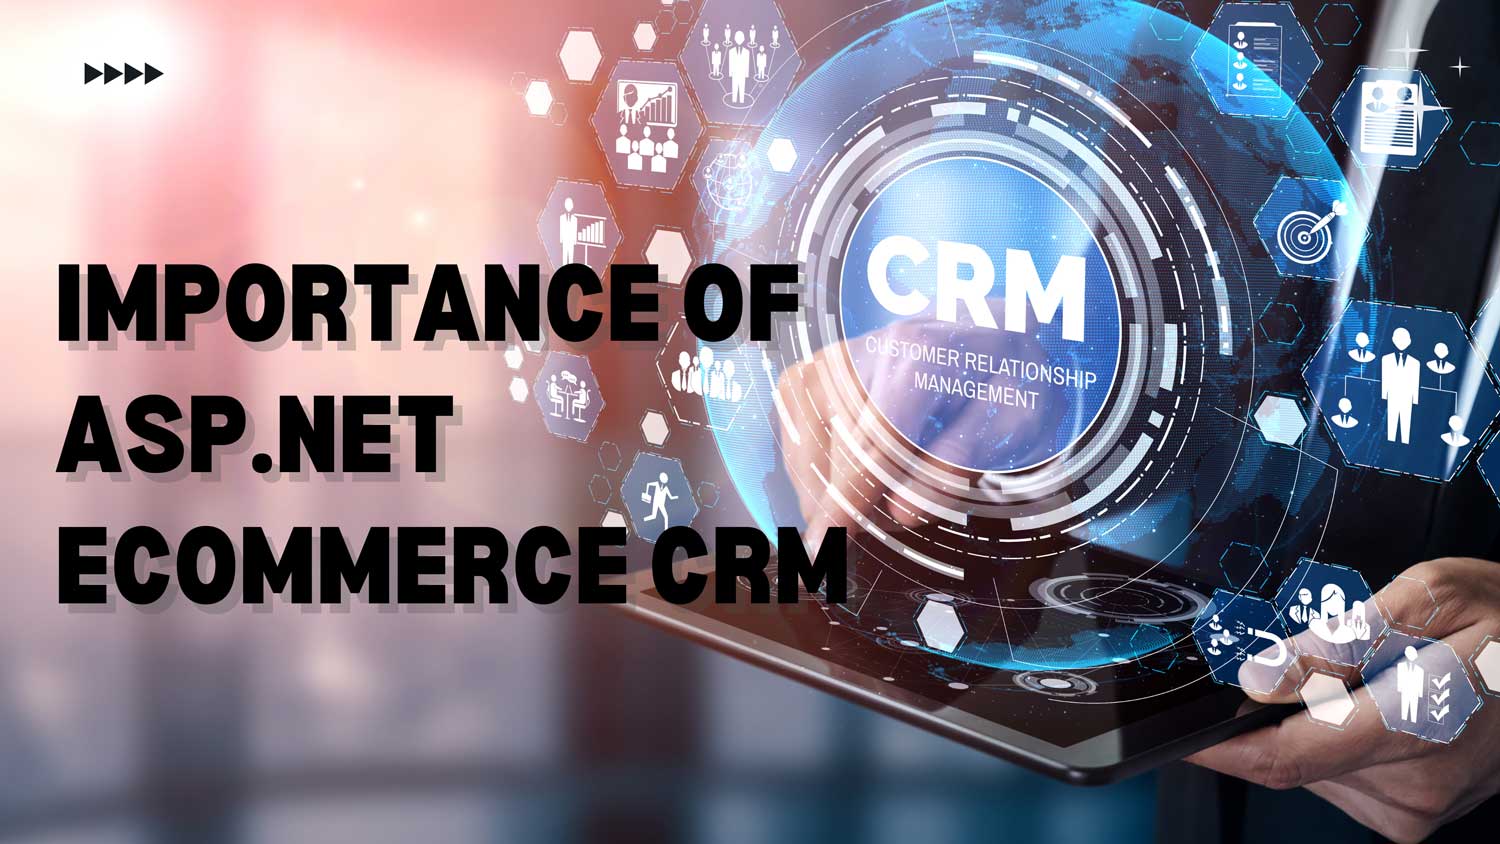 importance of asp net ecommerce crm featured